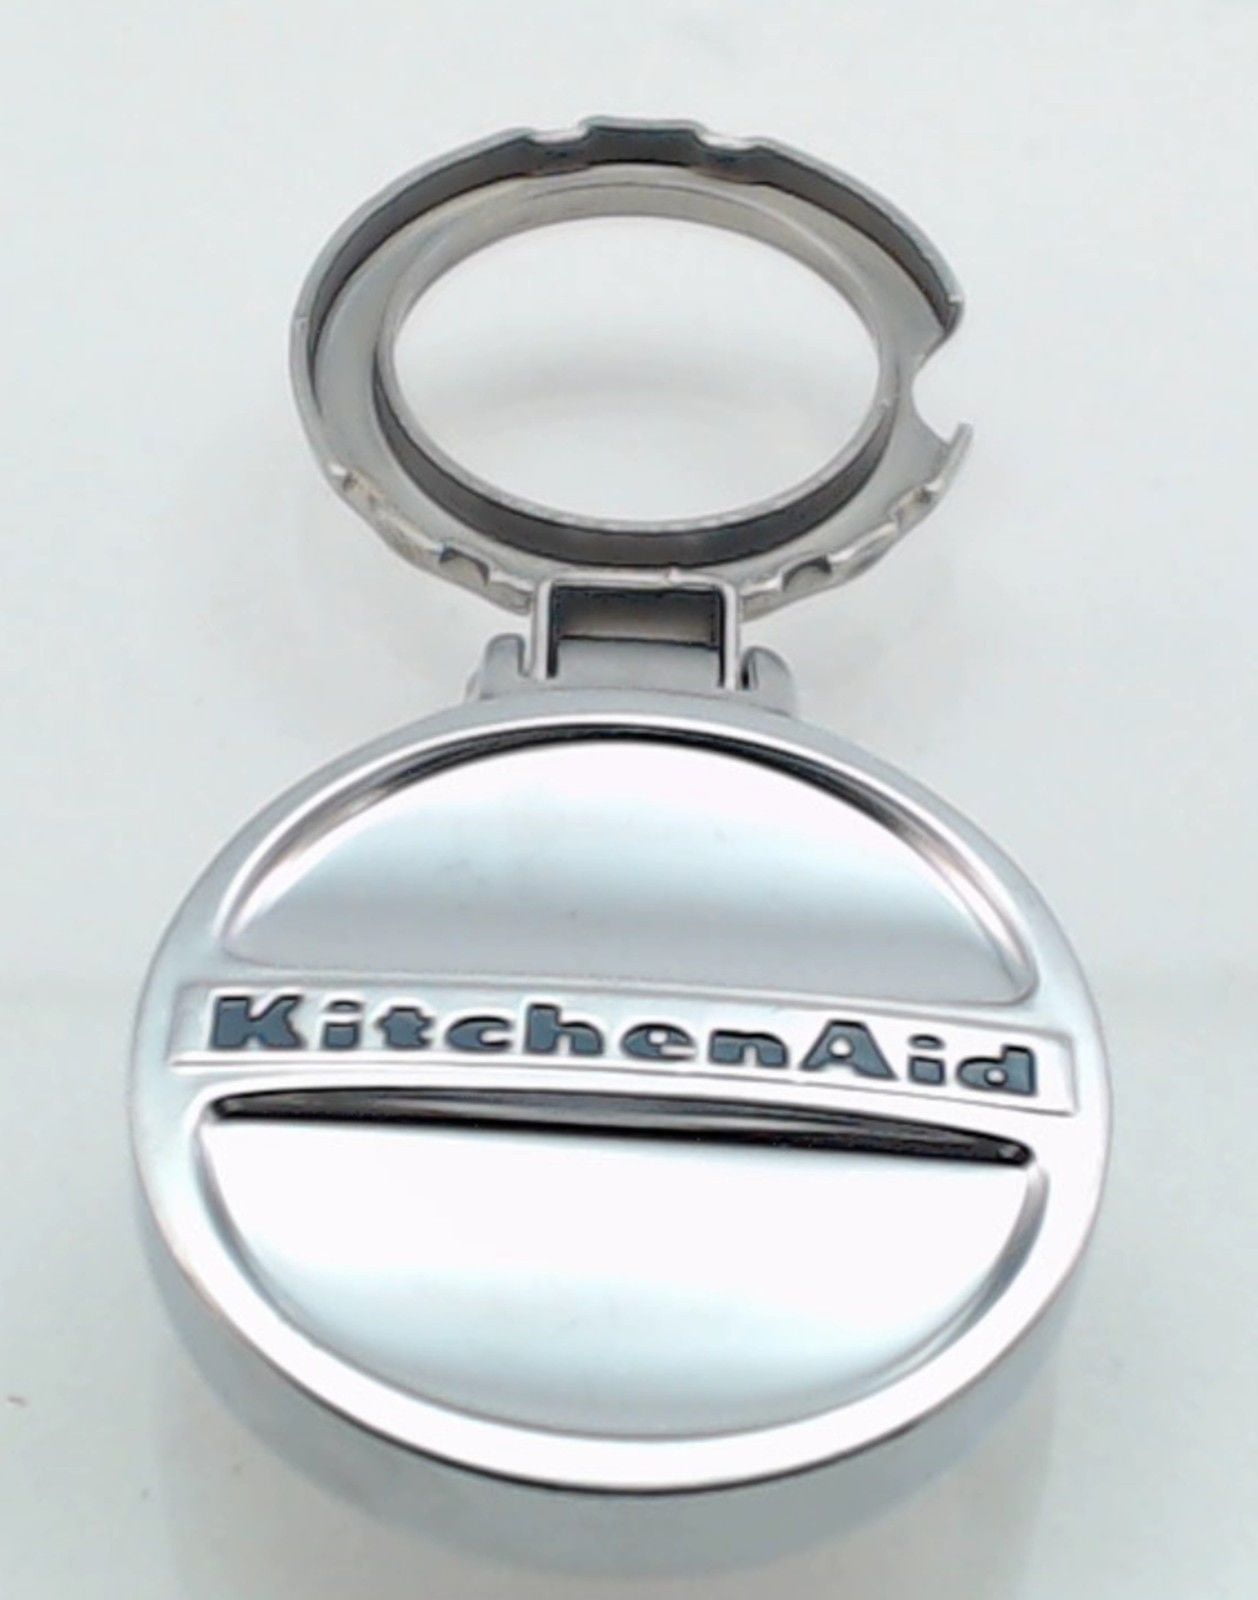 Assy-Hub Cover-Nickel 9709984 Attachment Cover for KitchenAid Stand Mixer* 